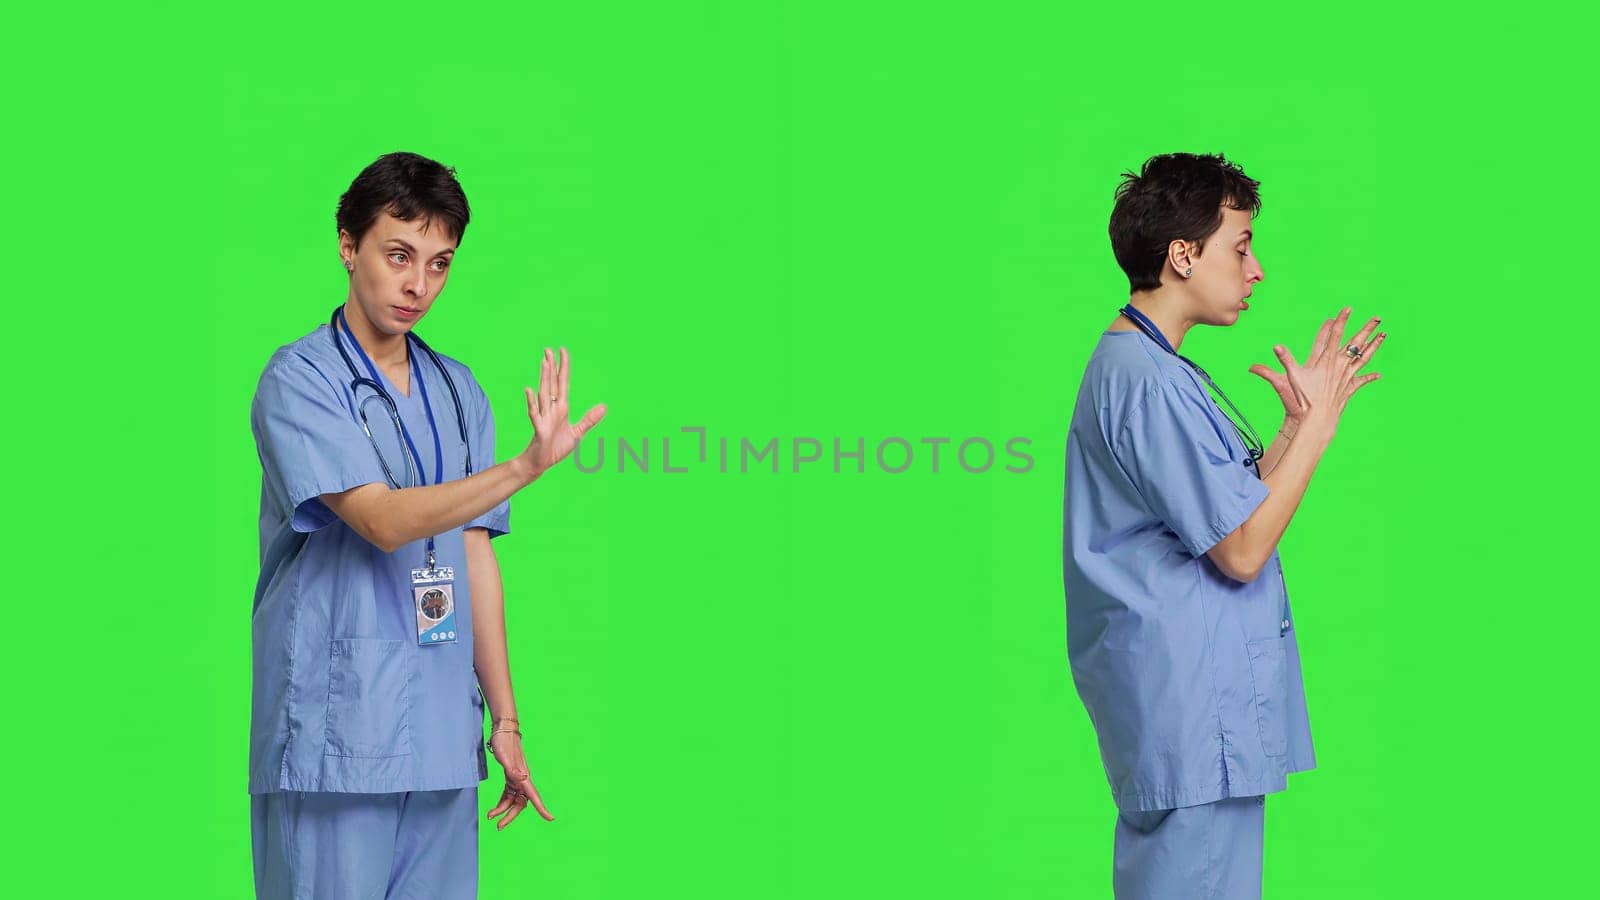 Displeased irritated nurse shouting no and arguing with someone against greenscreen backdrop, showing rage and anger while she wears hospital scrubs. Aggressive medical assistant. Camera B.